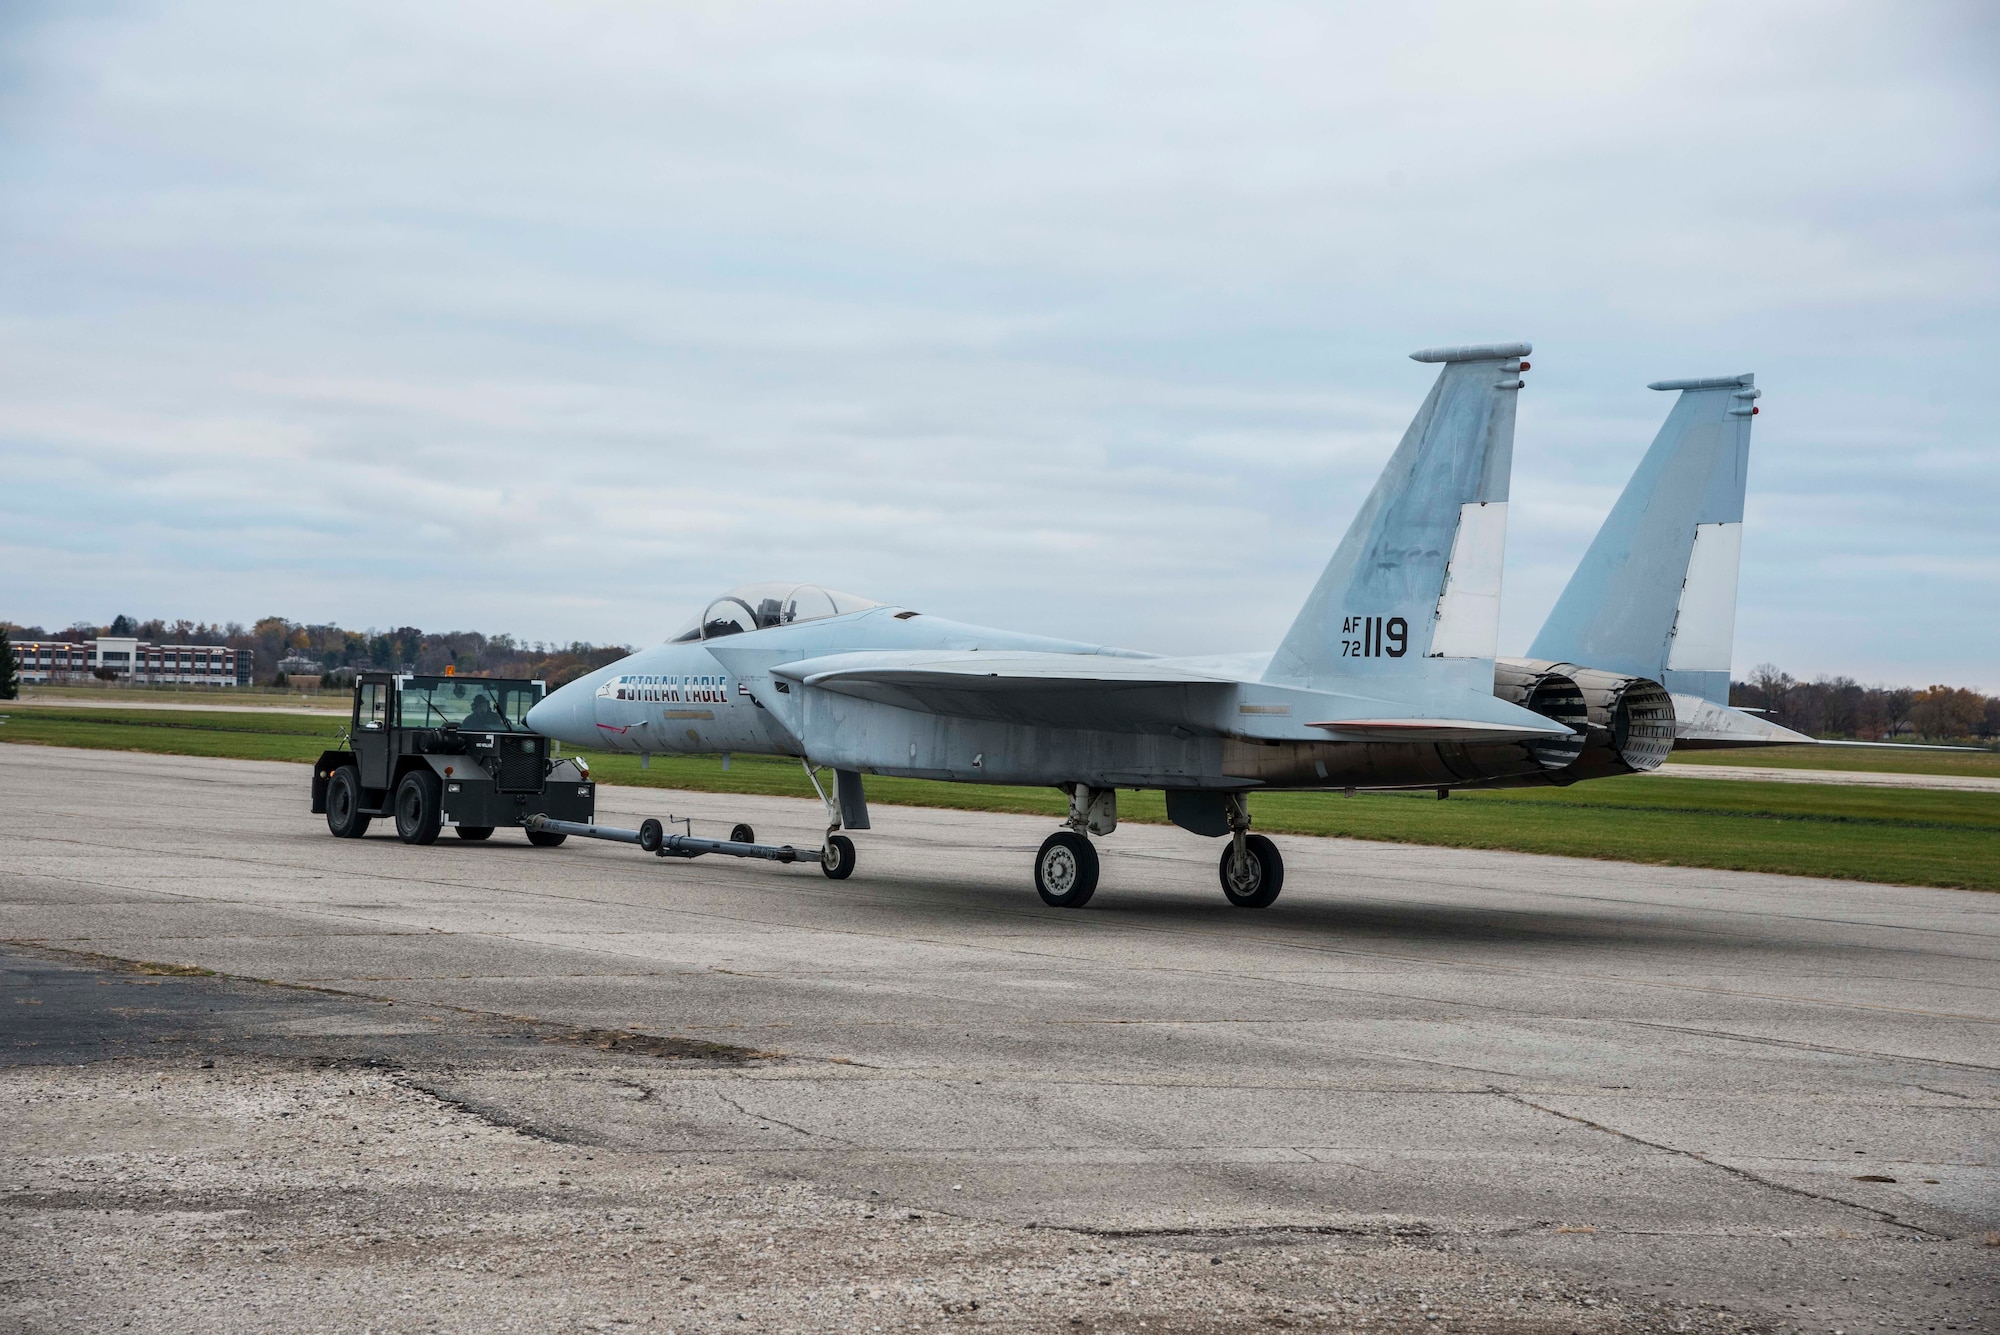 DAYTON, Ohio -- The McDonnell Douglas F-15 Streak Eagle being towed from storage to a restoration building in Nov. 2016.This aircraft can be viewed on the Behind the Scenes Tours. (U.S. Air Force photo by Ken LaRock)
